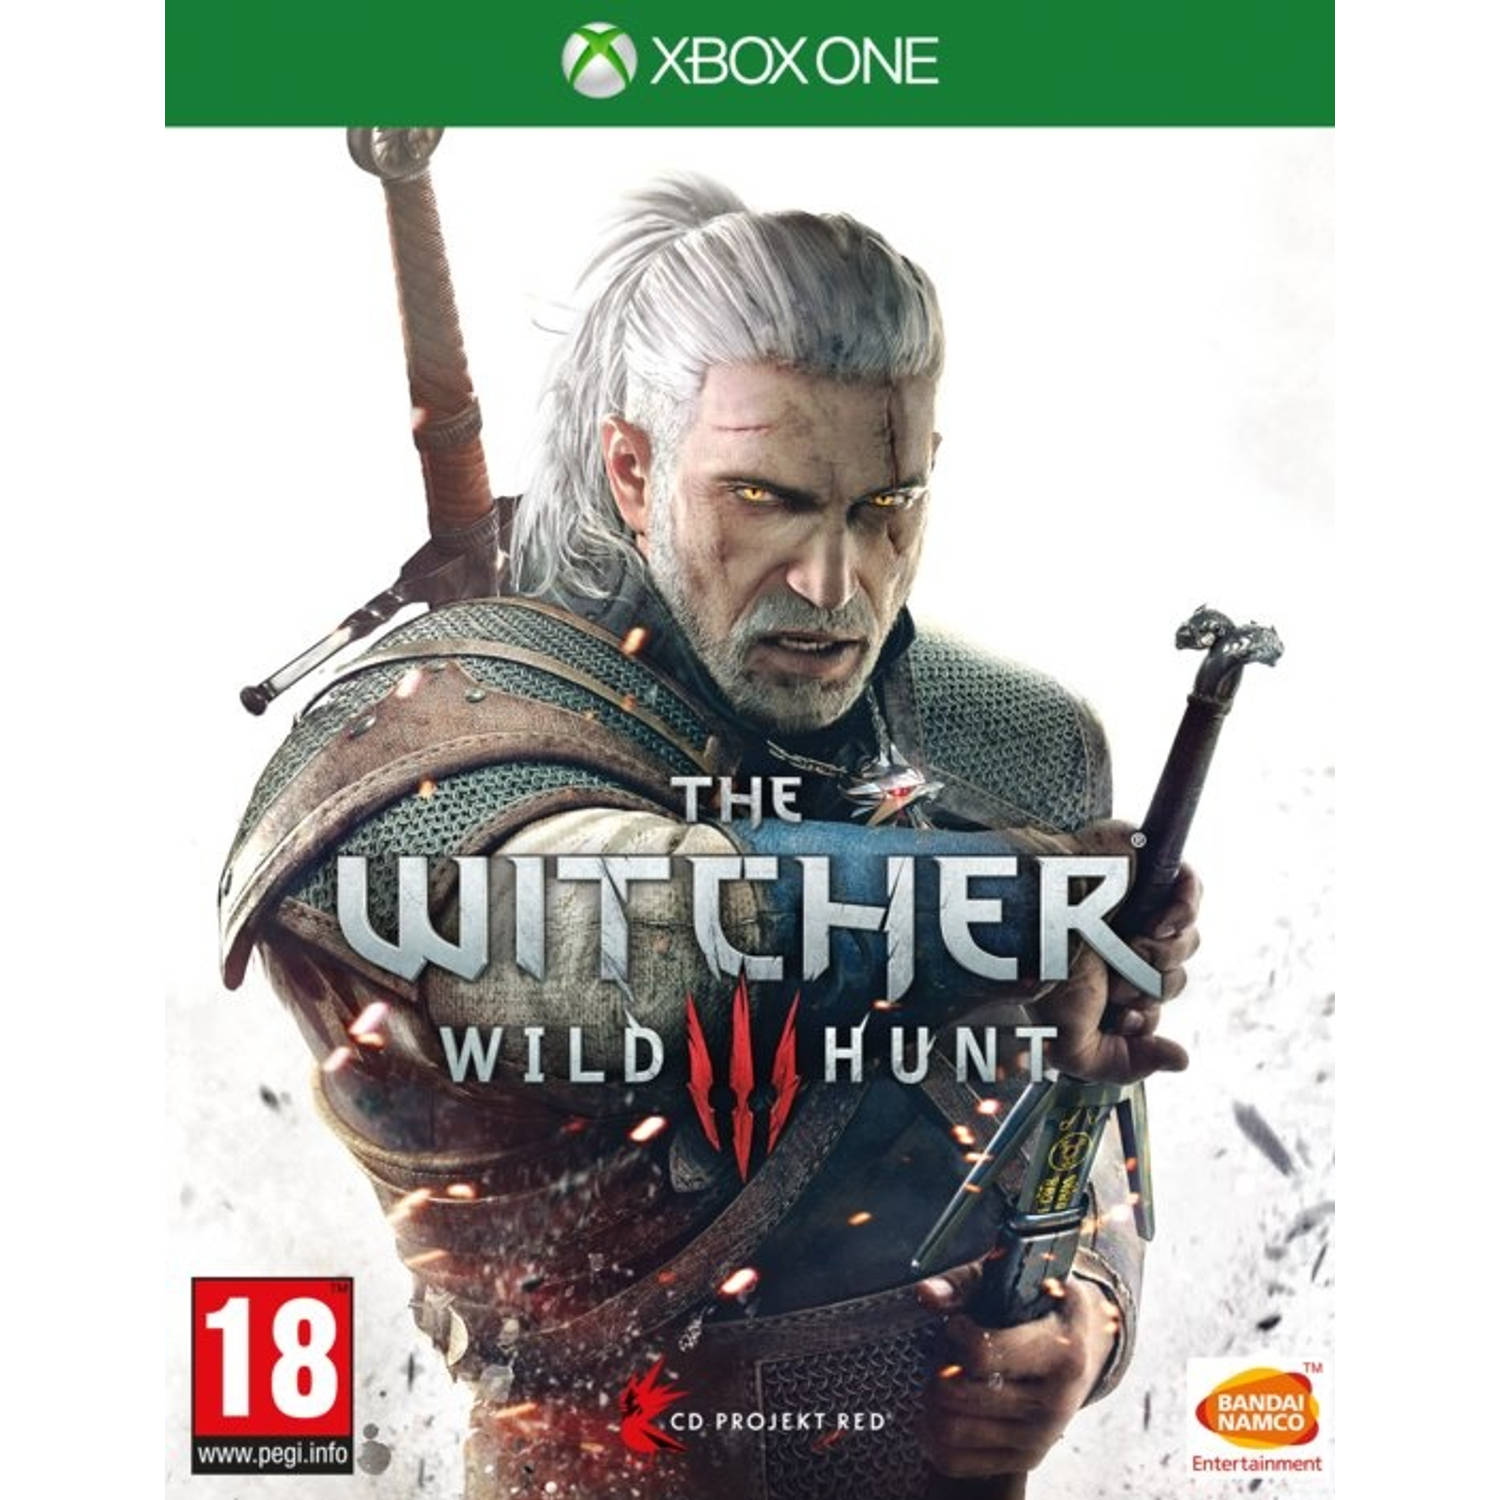 The Witcher 3: Wild Hunt - Standard Edition - Xbox One